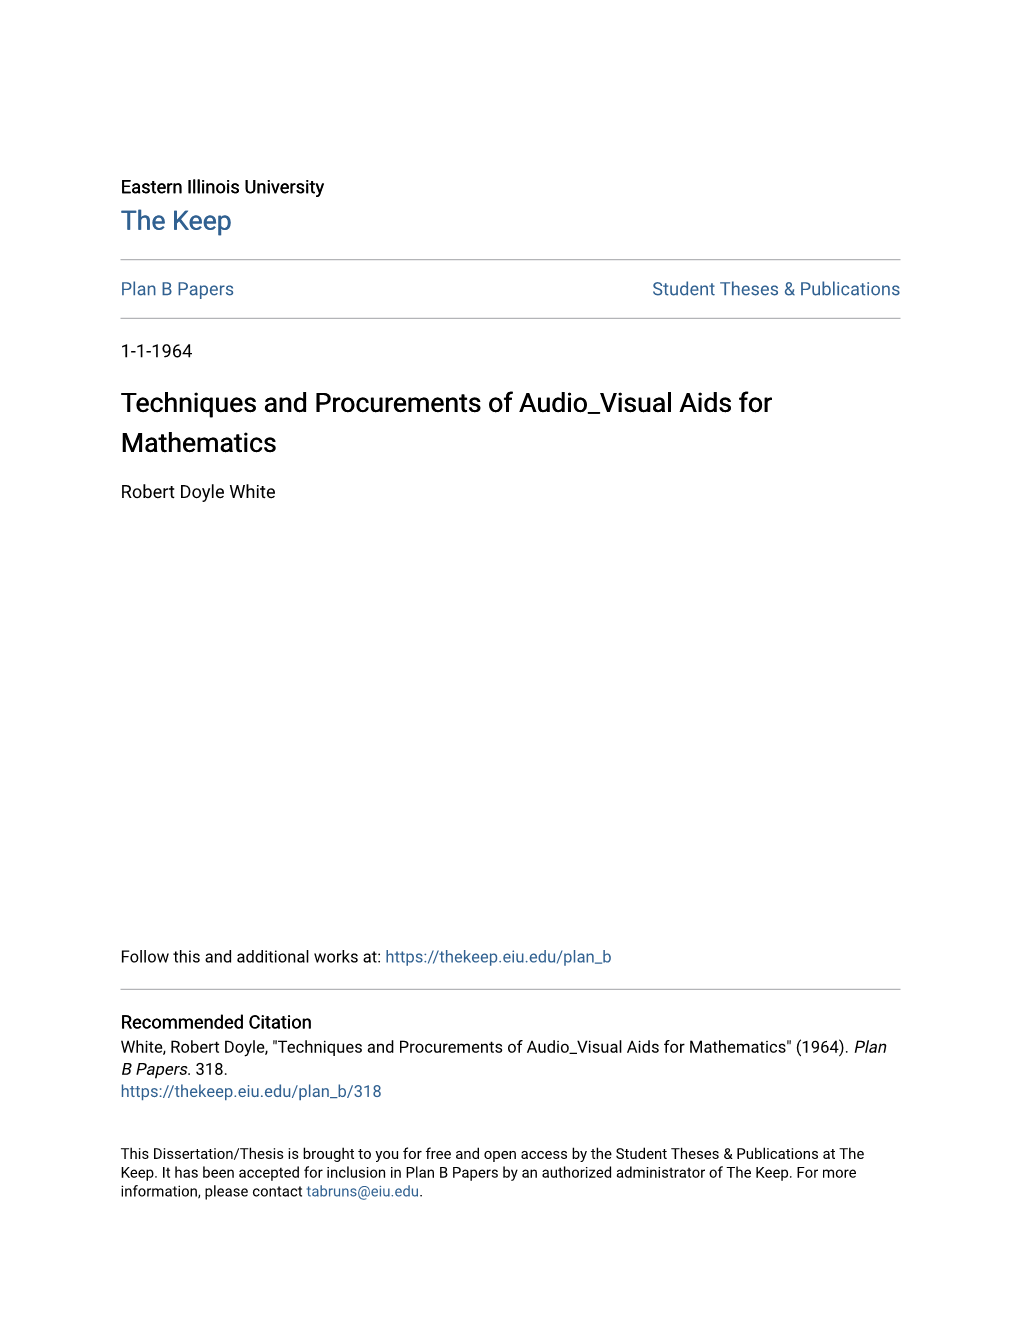 Techniques and Procurements of Audio Visual Aids for Mathematics